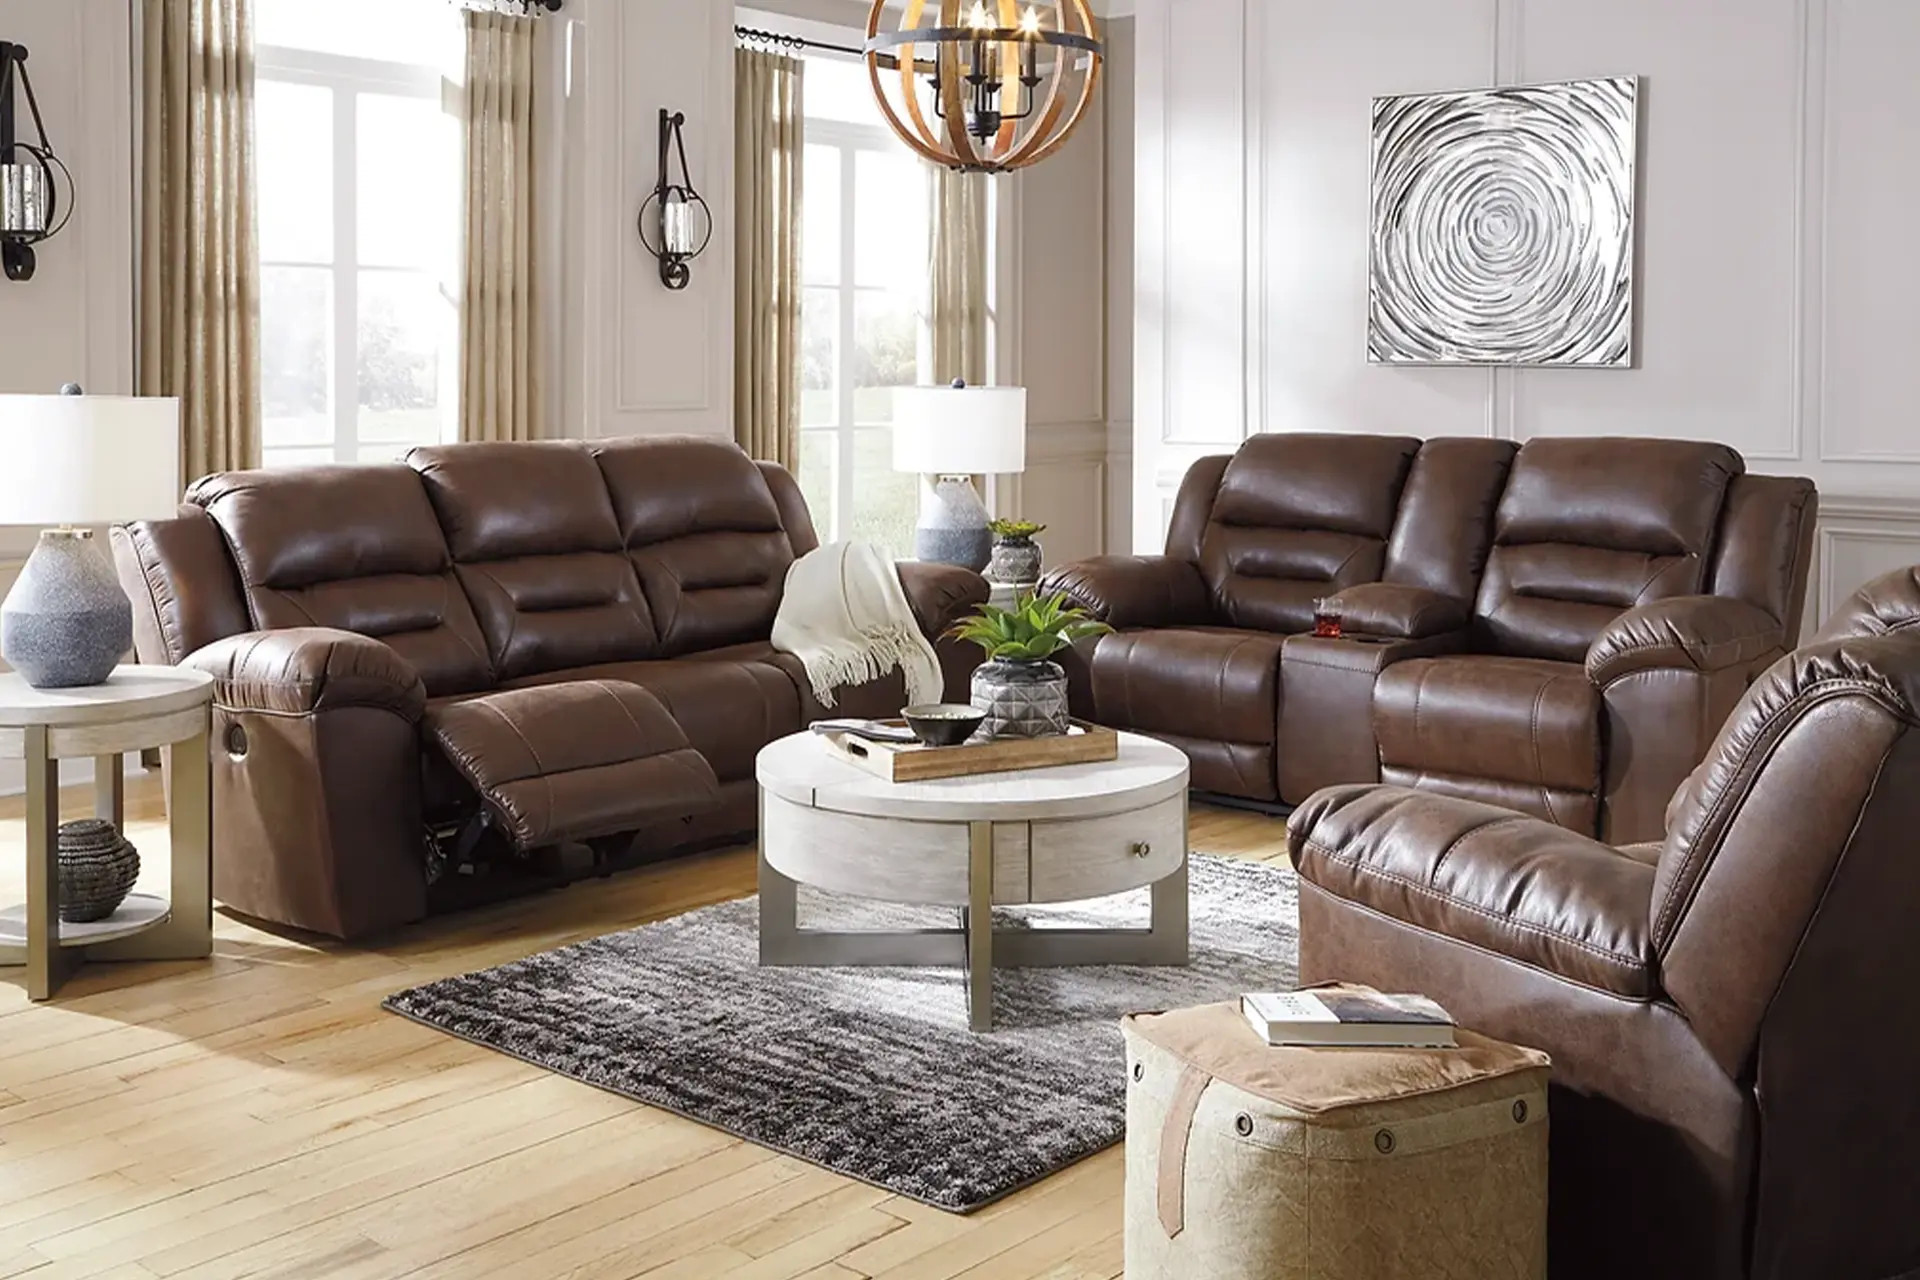 Stoneland Chocolate Reclining Sofa, Love, and Recliner.